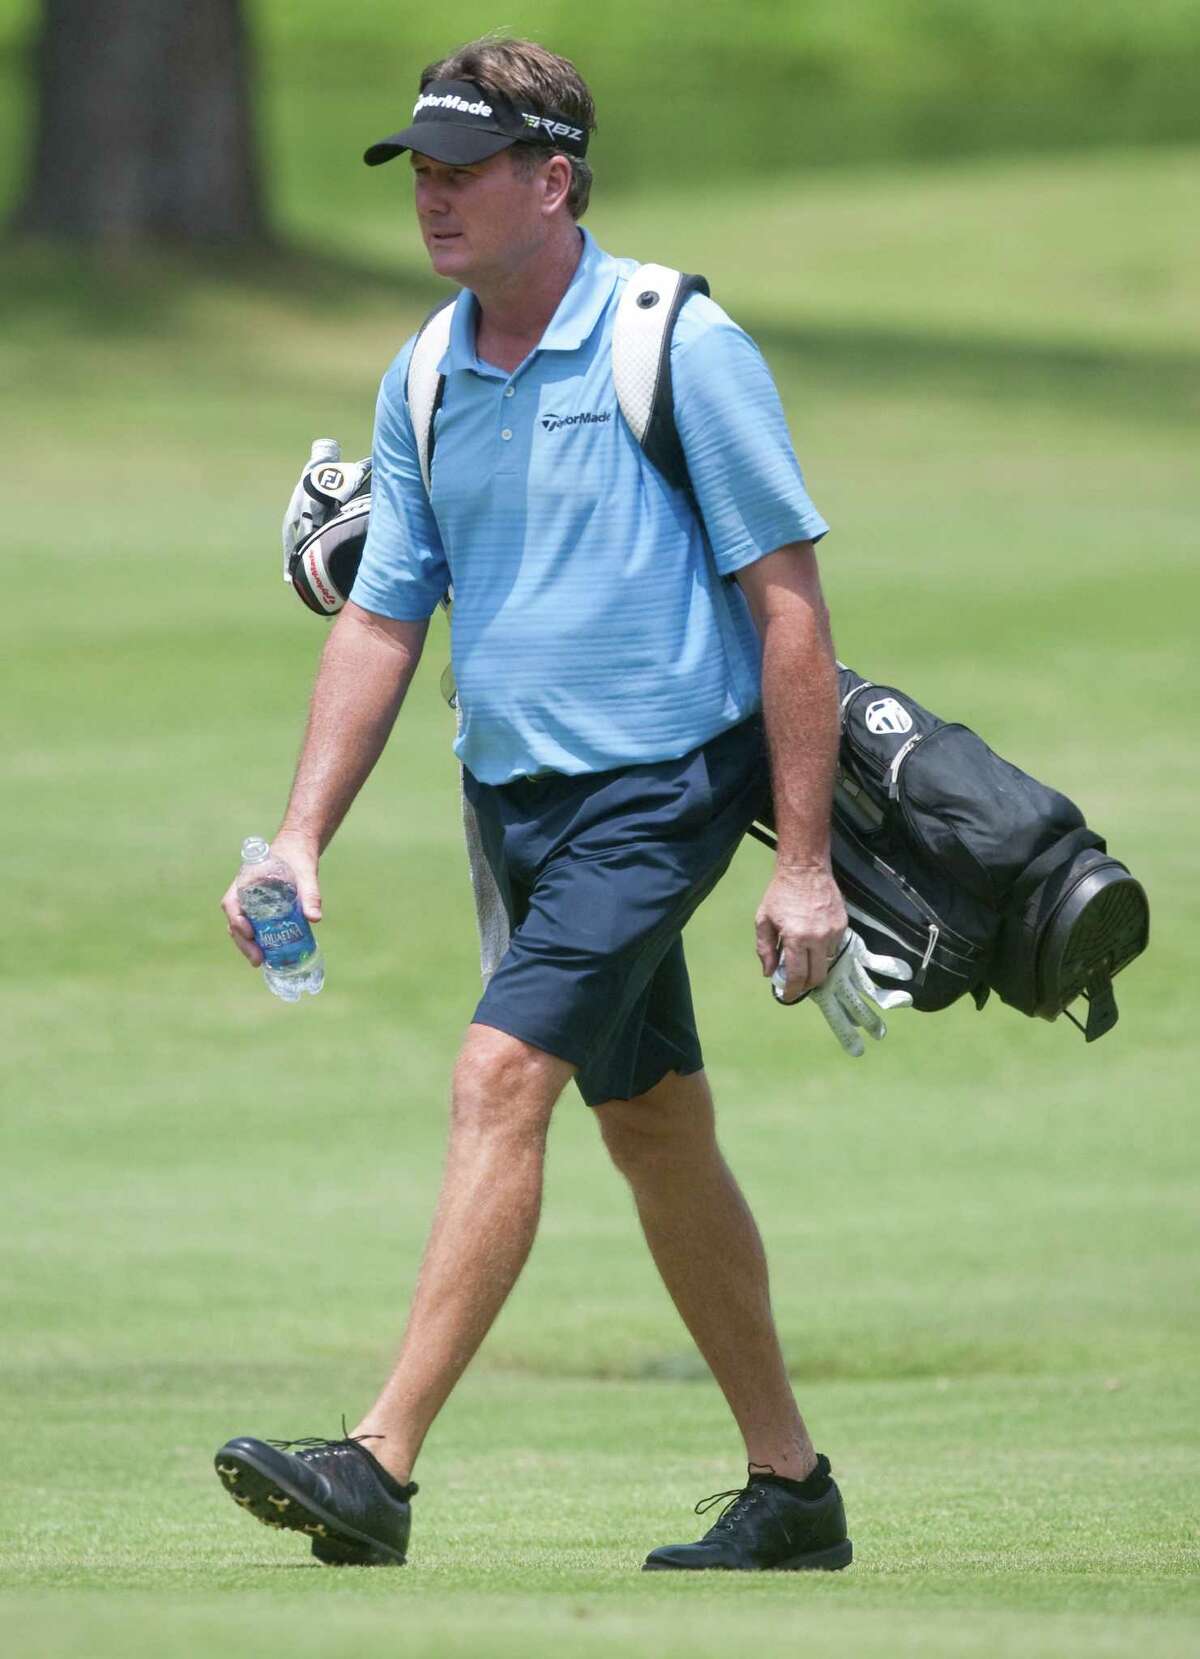 Todd Hamilton carries his own bags on hole sixth during the U.S. Open sectional qualifying tournament at Lakeside County Club on Monday, June 4, 2012 in Houston, Texas.